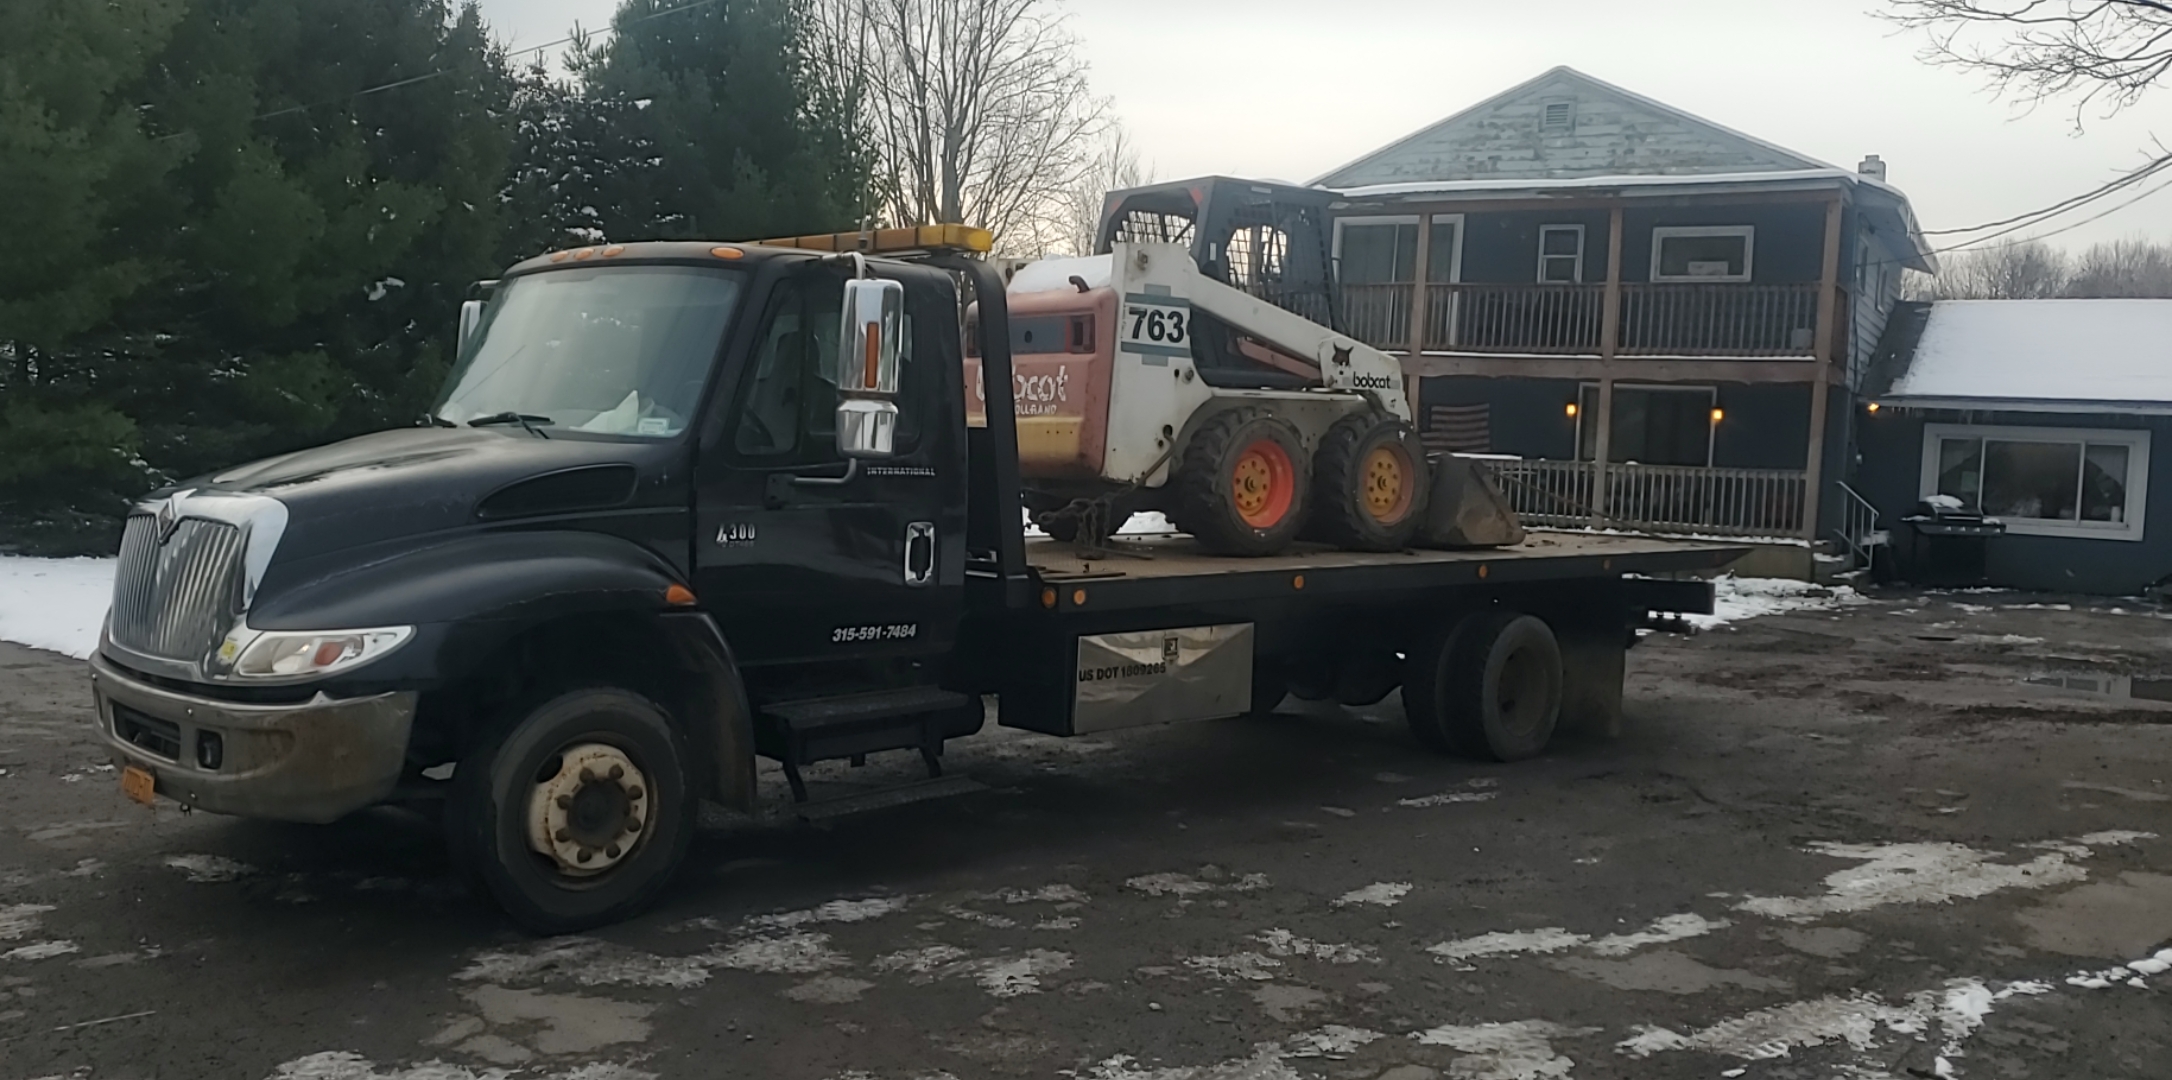 Colosse Towing & Recovery | (315) 591-7484 | Parish, NY | 24 Hour Towing Service | Light Duty Towing | Medium Duty Towing | Flatbed Towing | Box Truck Towing | Dually Towing | Motorcycle Towing | Limousine Towing | Classic Car Towing | Luxury Car Towing | Sports Car Towing | Exotic Car Towing | RV Towing | Motorhome Transport | Long Distance Towing | Junk Car Removal | Winching & Extraction | Accident Recovery | Accident Cleanup | Equipment Transportation | Moving Forklifts | Scissor Lifts Movers | Boom Lifts Movers | Bull Dozers Movers | Excavators Movers | Compressors Movers | Auto Transports | Private Property Impound (Non-Consensual Towing) | Police Impounds | Roadside Assistance | Lockouts | Fuel Delivery | Fluid Delivery | Jump Starts | Tire Service | Tire Changes | Mobile Mechanic